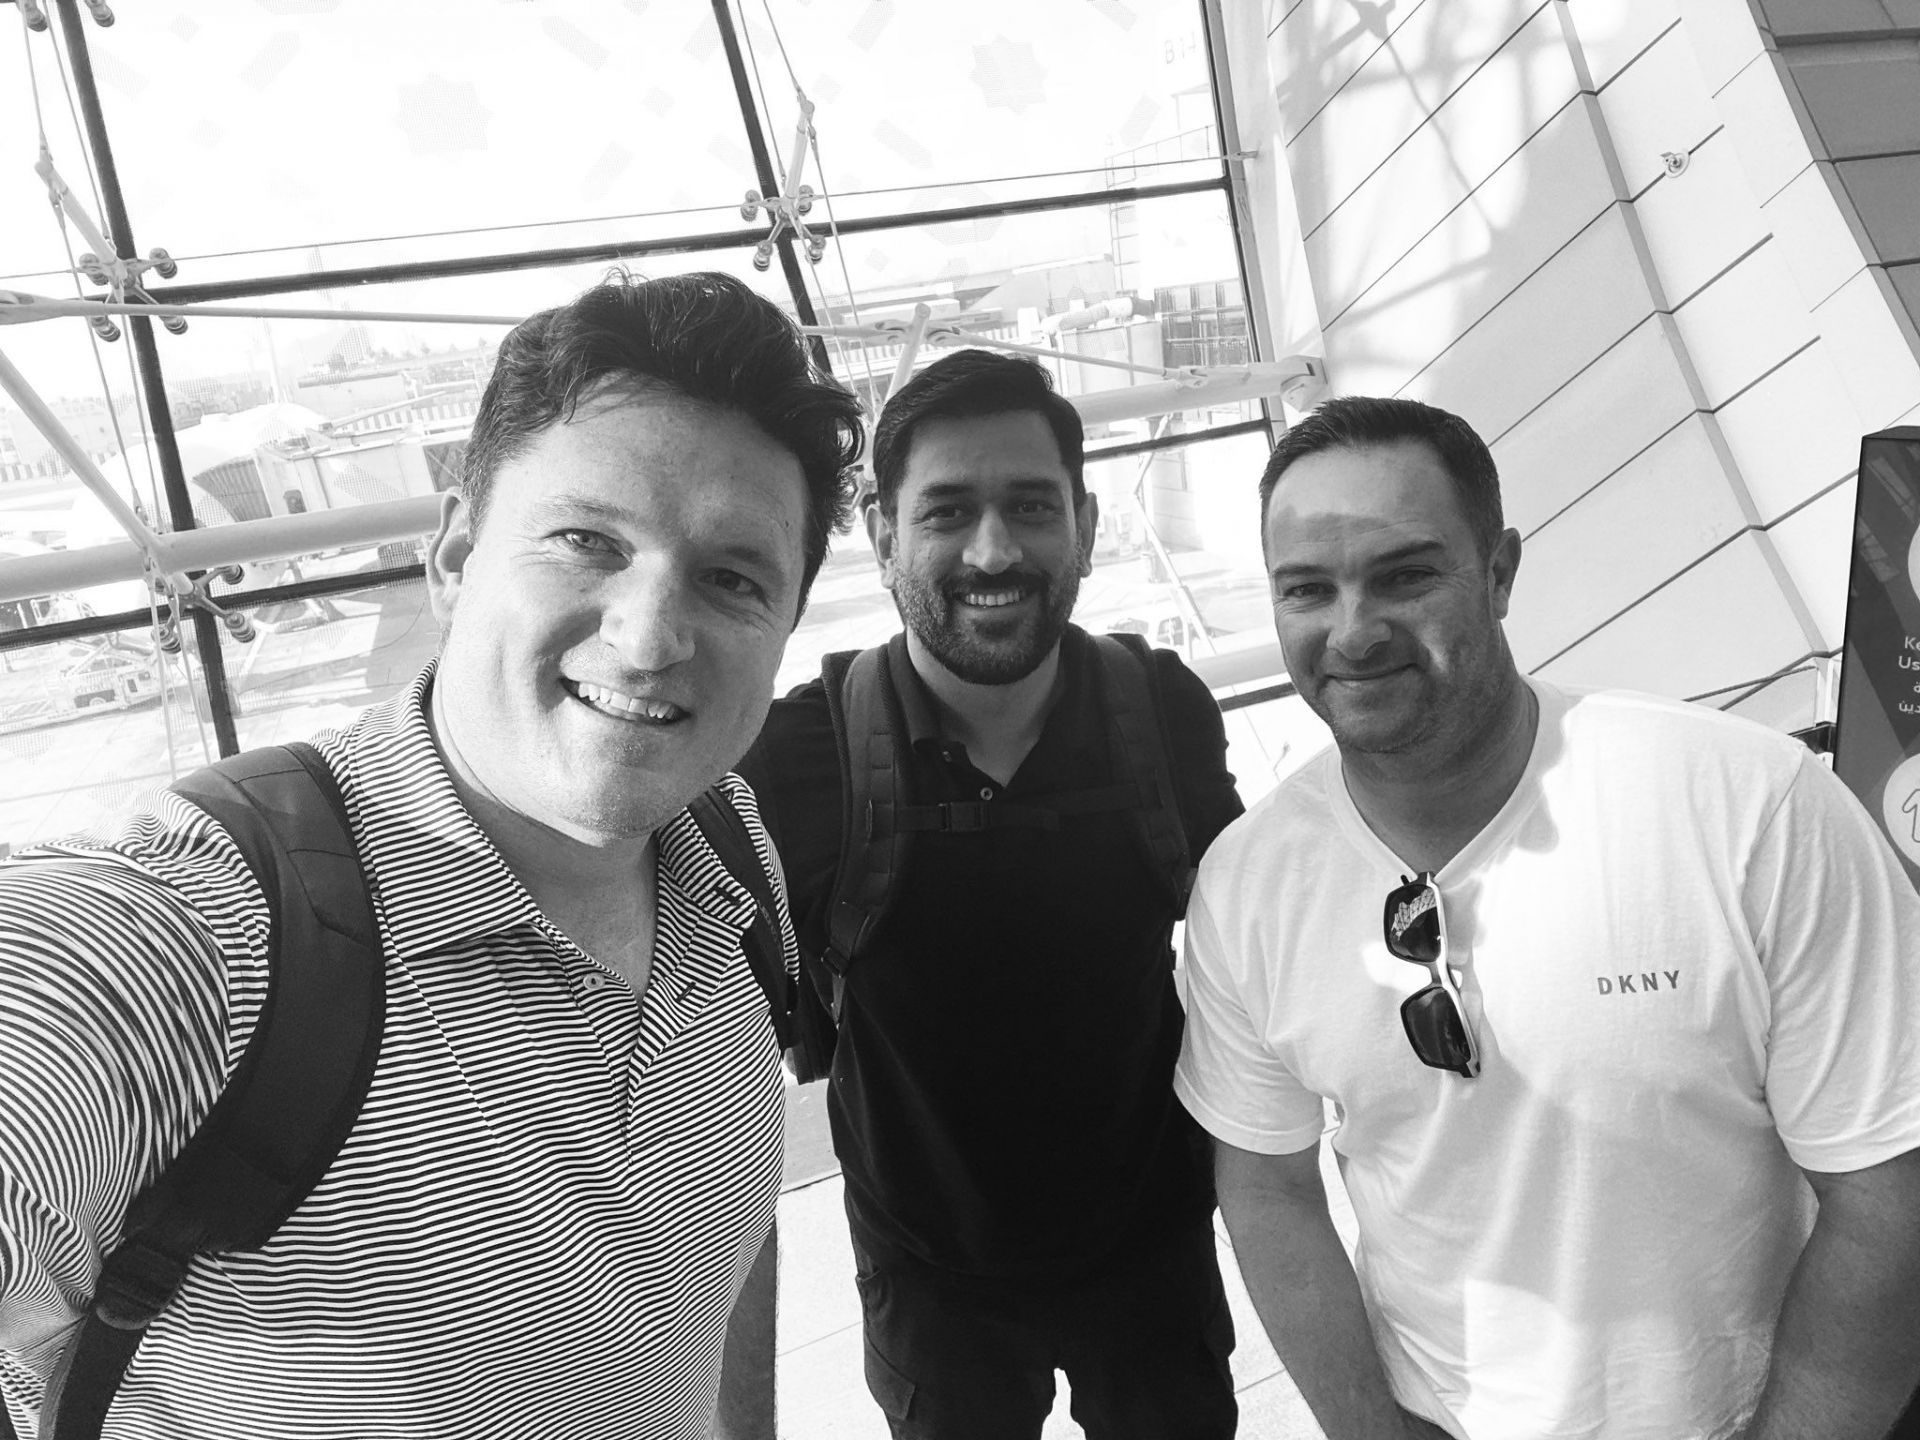 &quot;I ran into MS Dhoni at the airport yesterday and the entire conversation was around SA20&quot; - Graeme Smith 